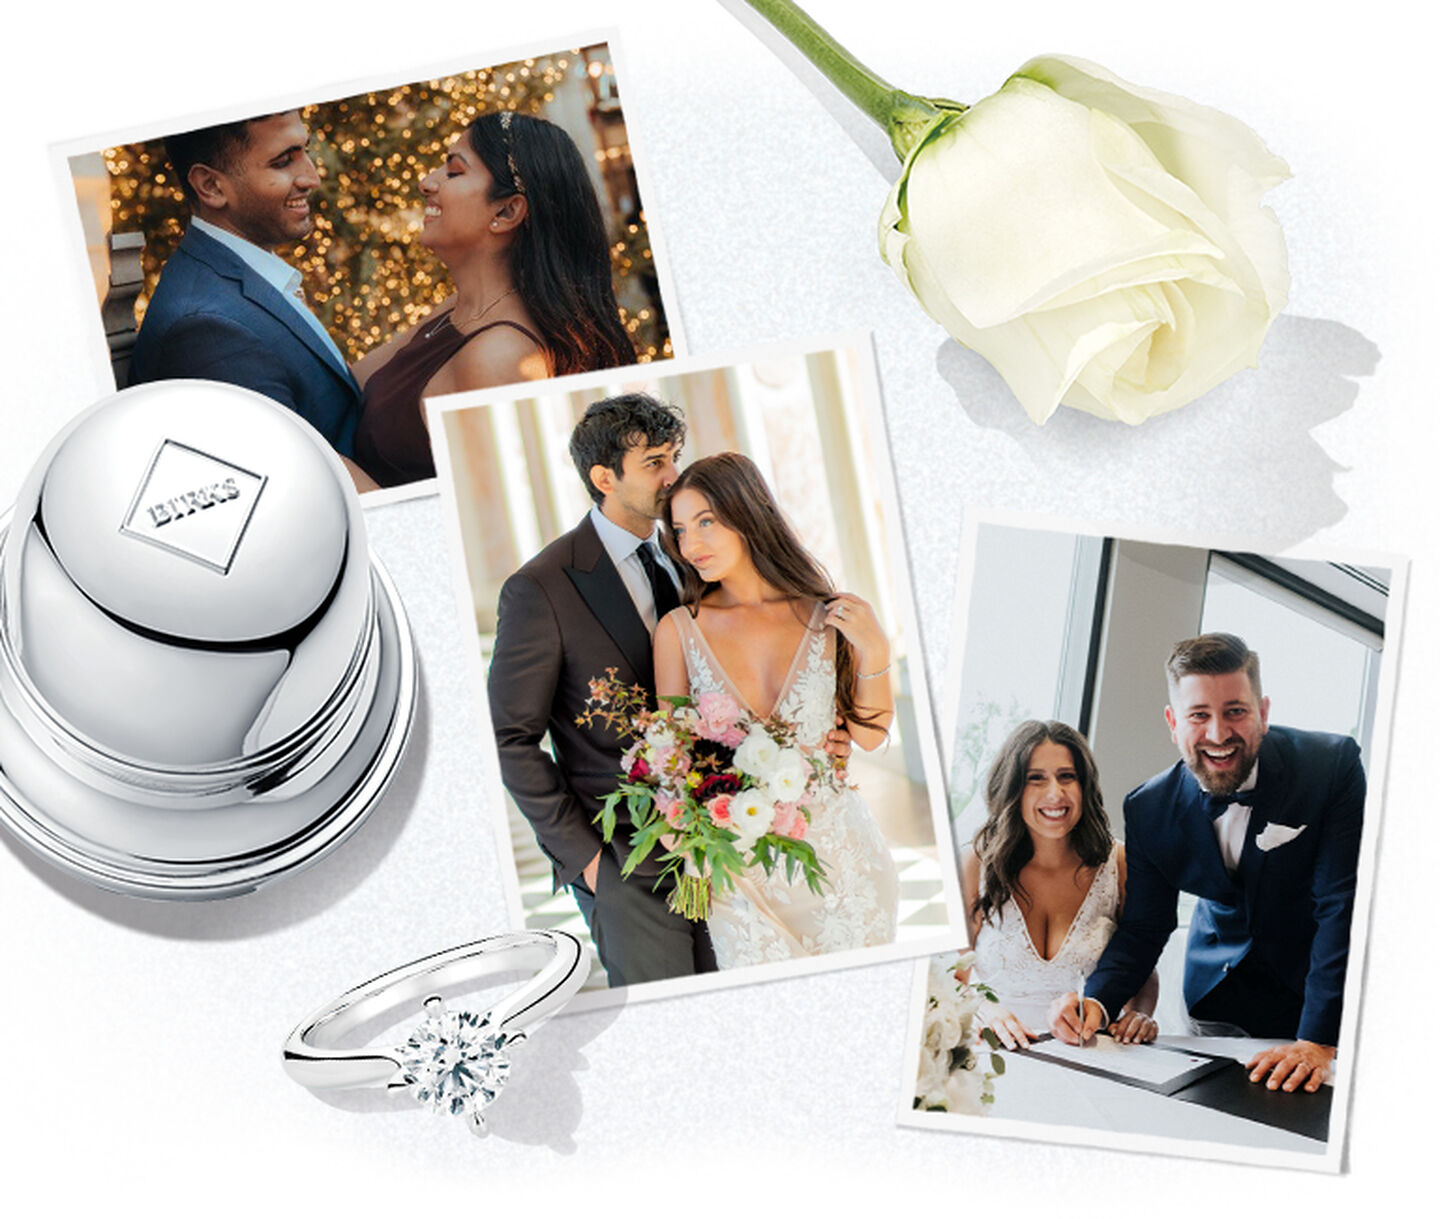 Three photographs of happy couples between a Birks Bell Box and a white rose